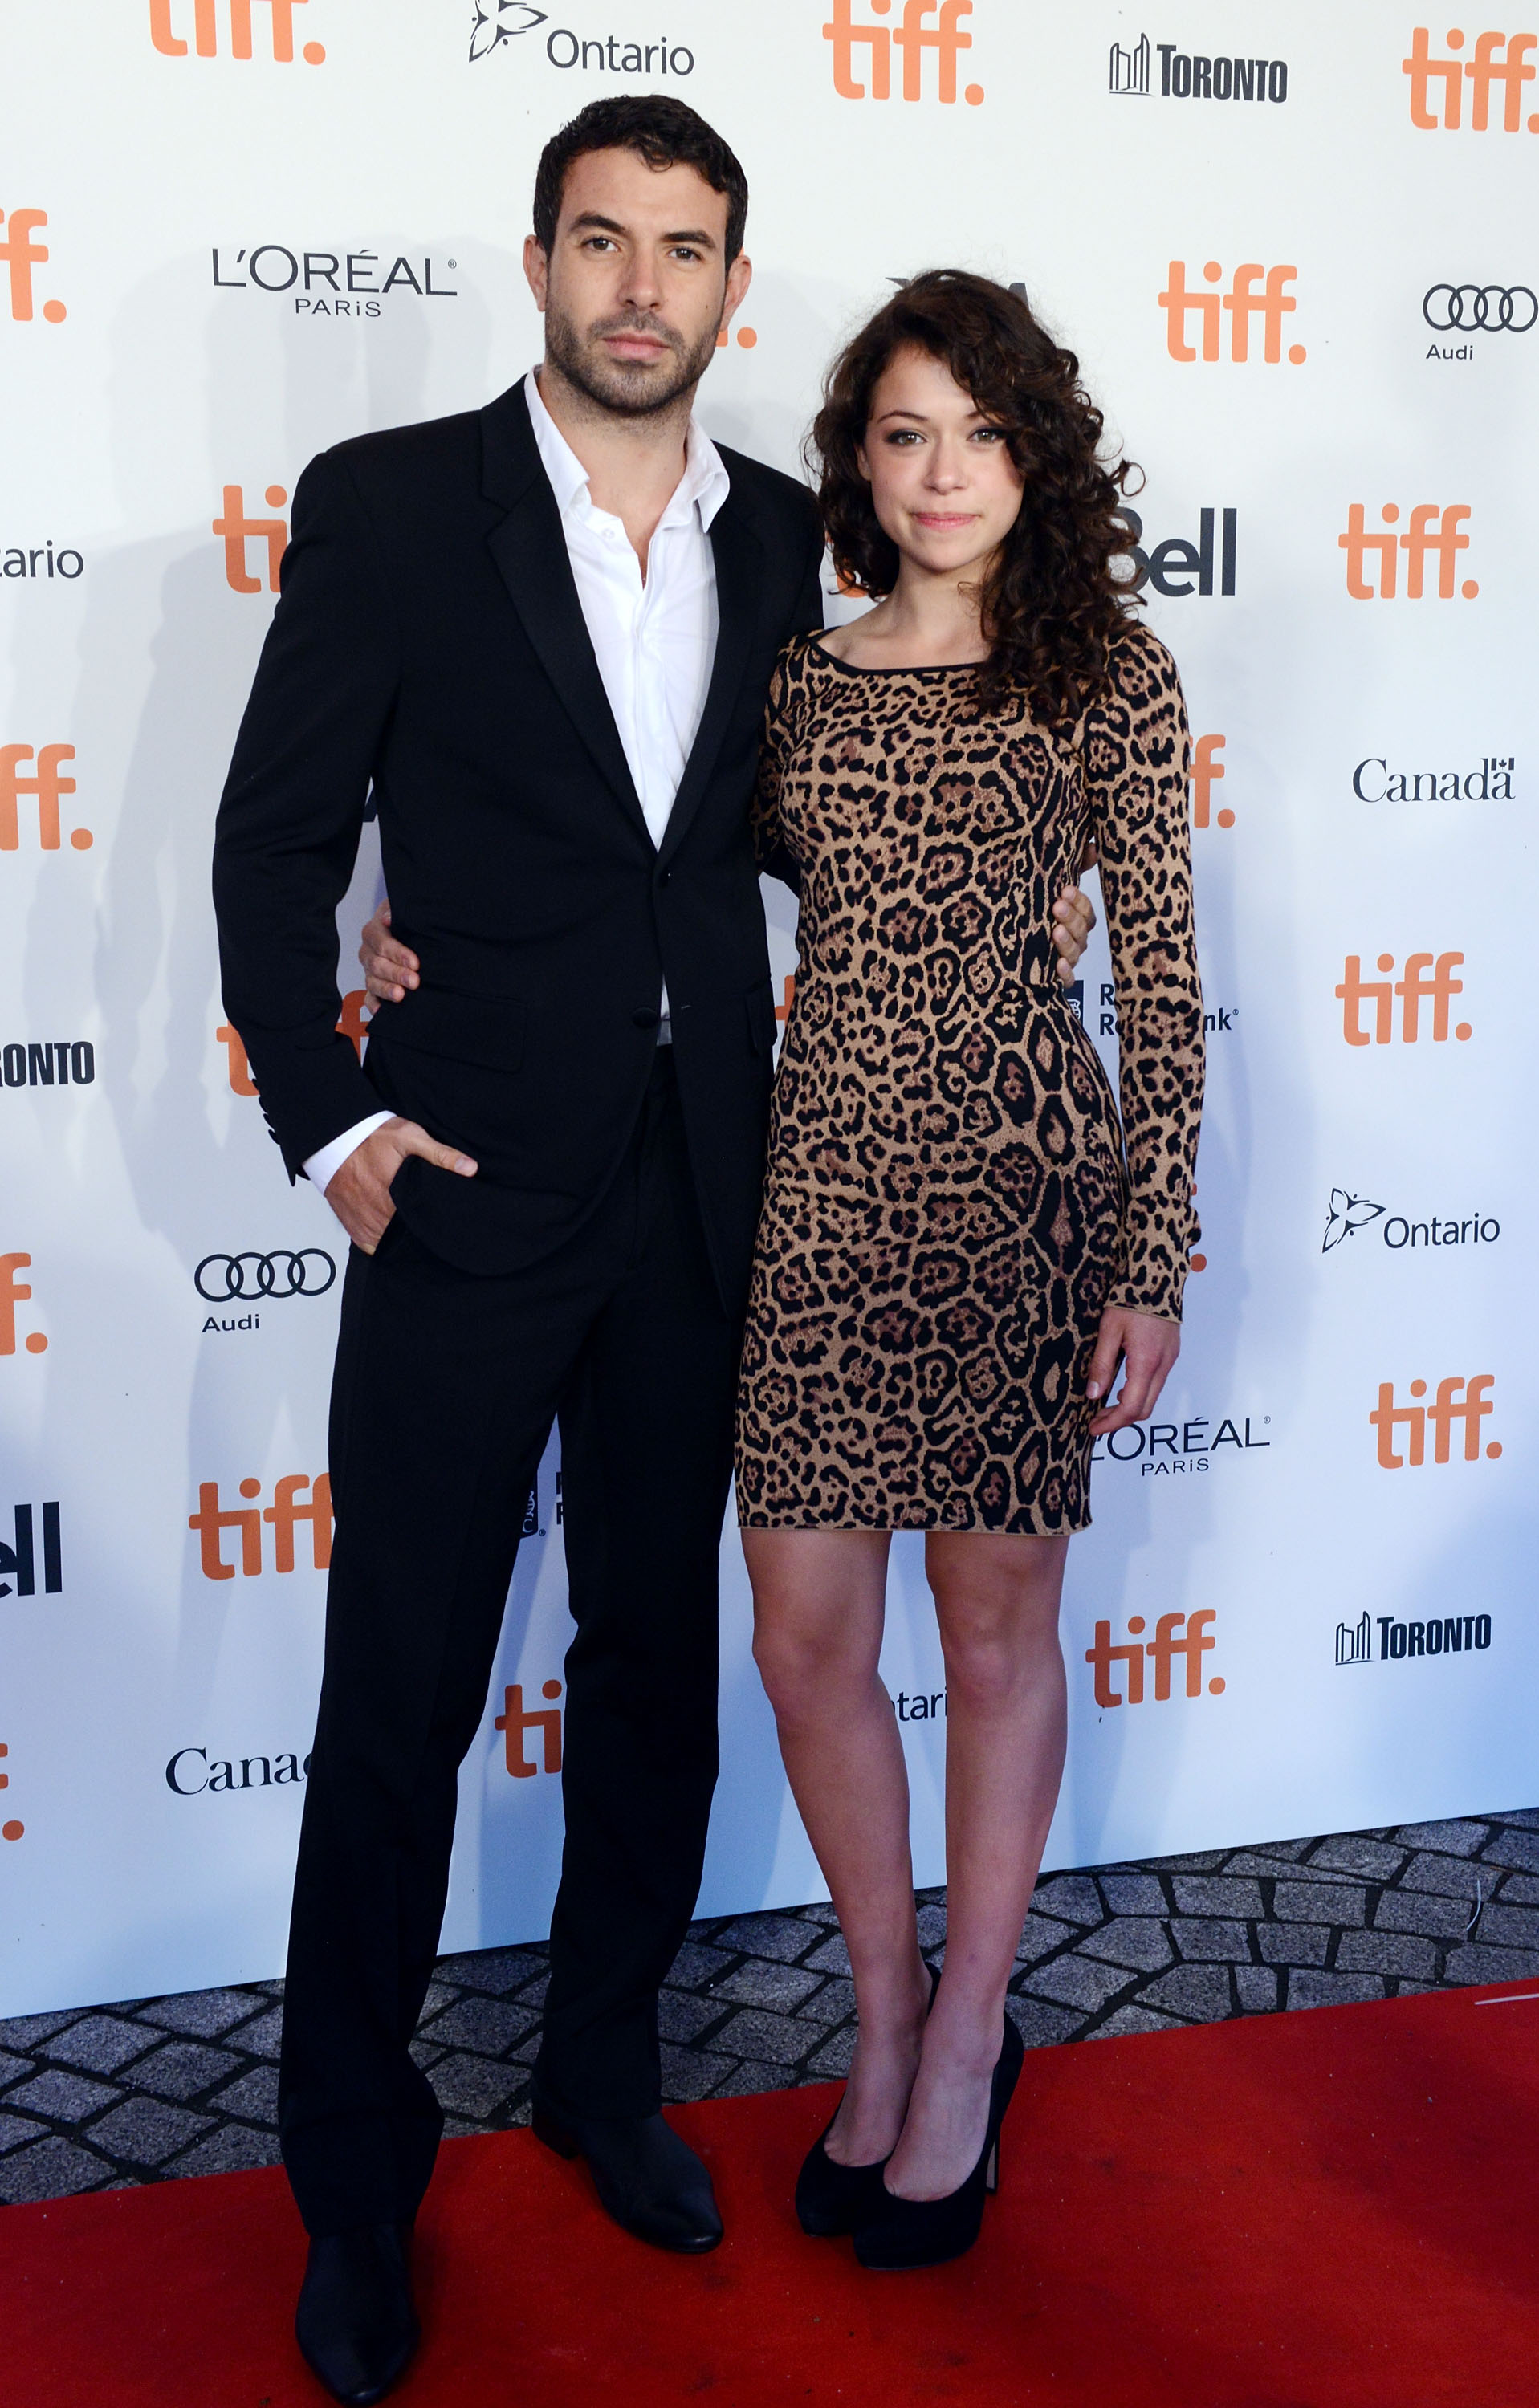 Tom Cullen and Tatiana Maslany at Corus Quay on September 8, 2012, in Toronto, Canada. | Source: Getty Images